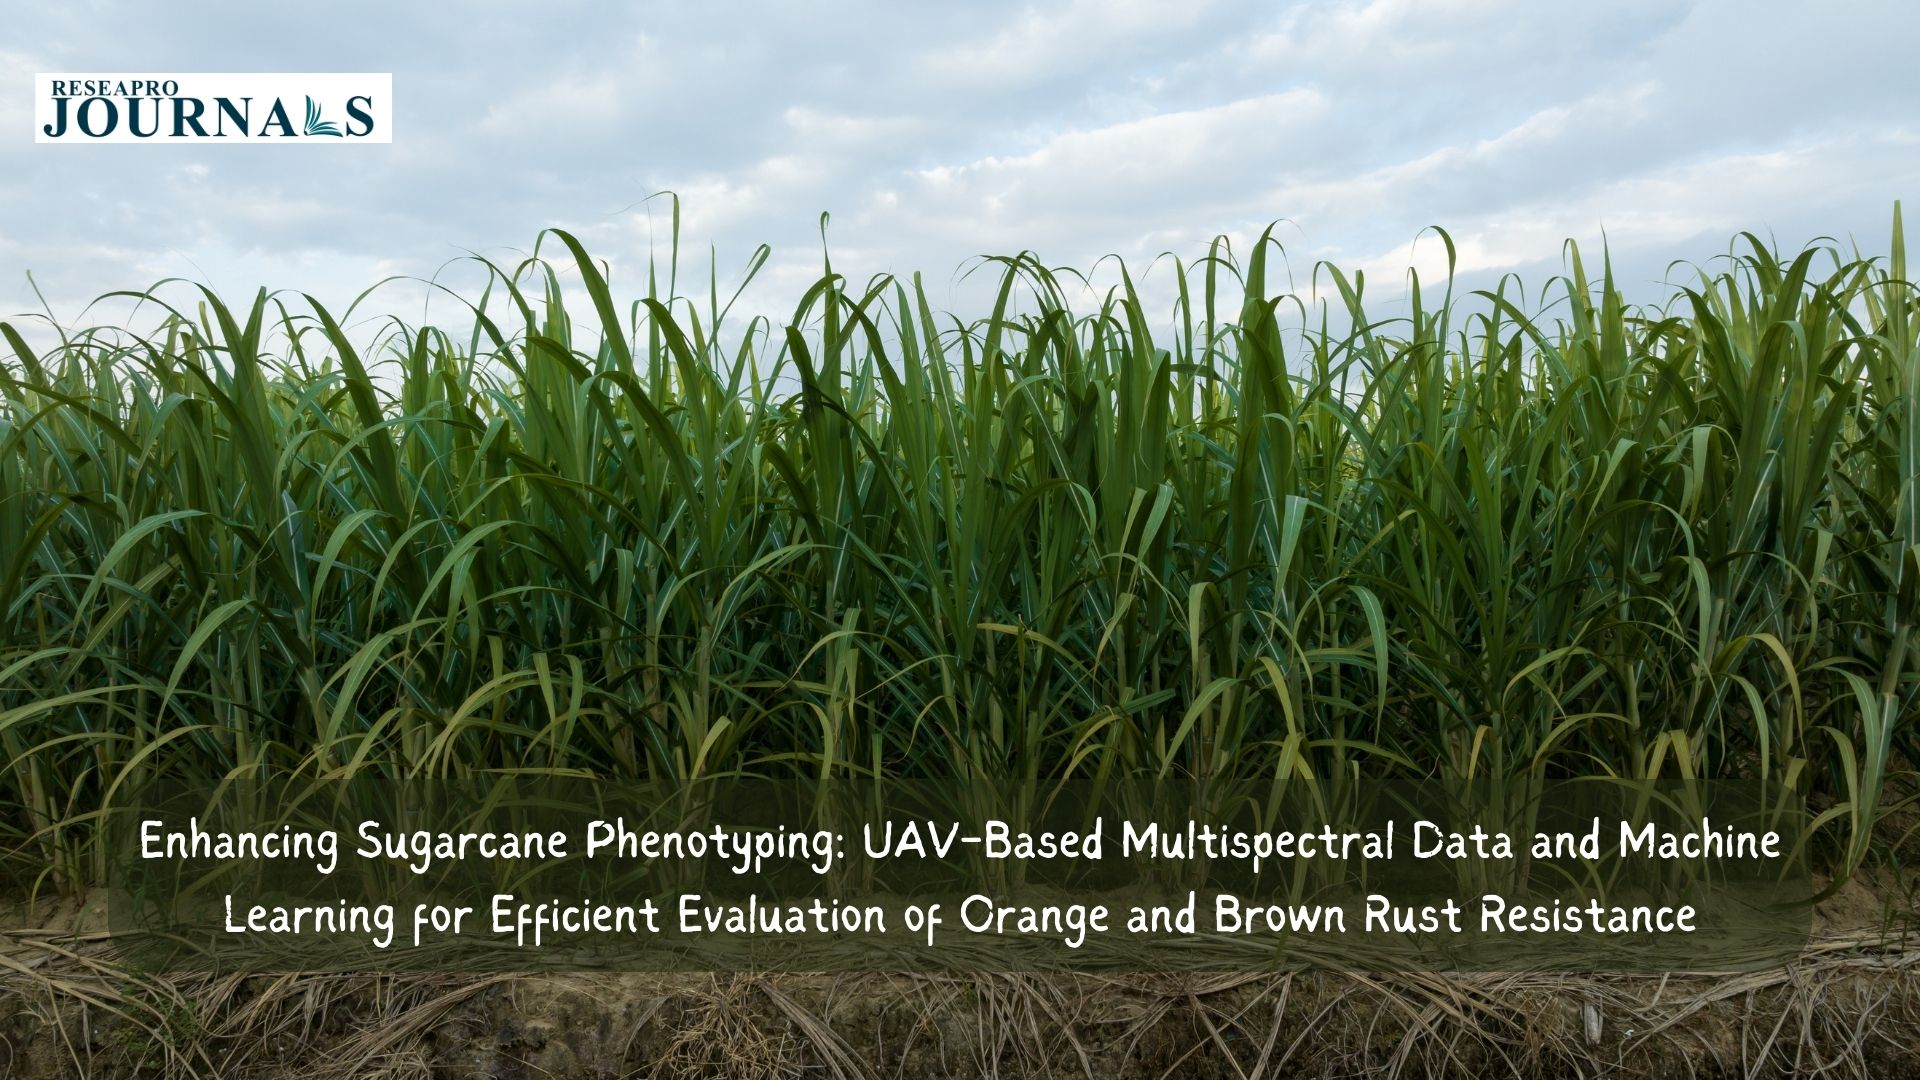 Enhancing Sugarcane Phenotyping: UAV-Based Multispectral Data and Machine Learning for Efficient Evaluation of Orange and Brown Rust Resistance